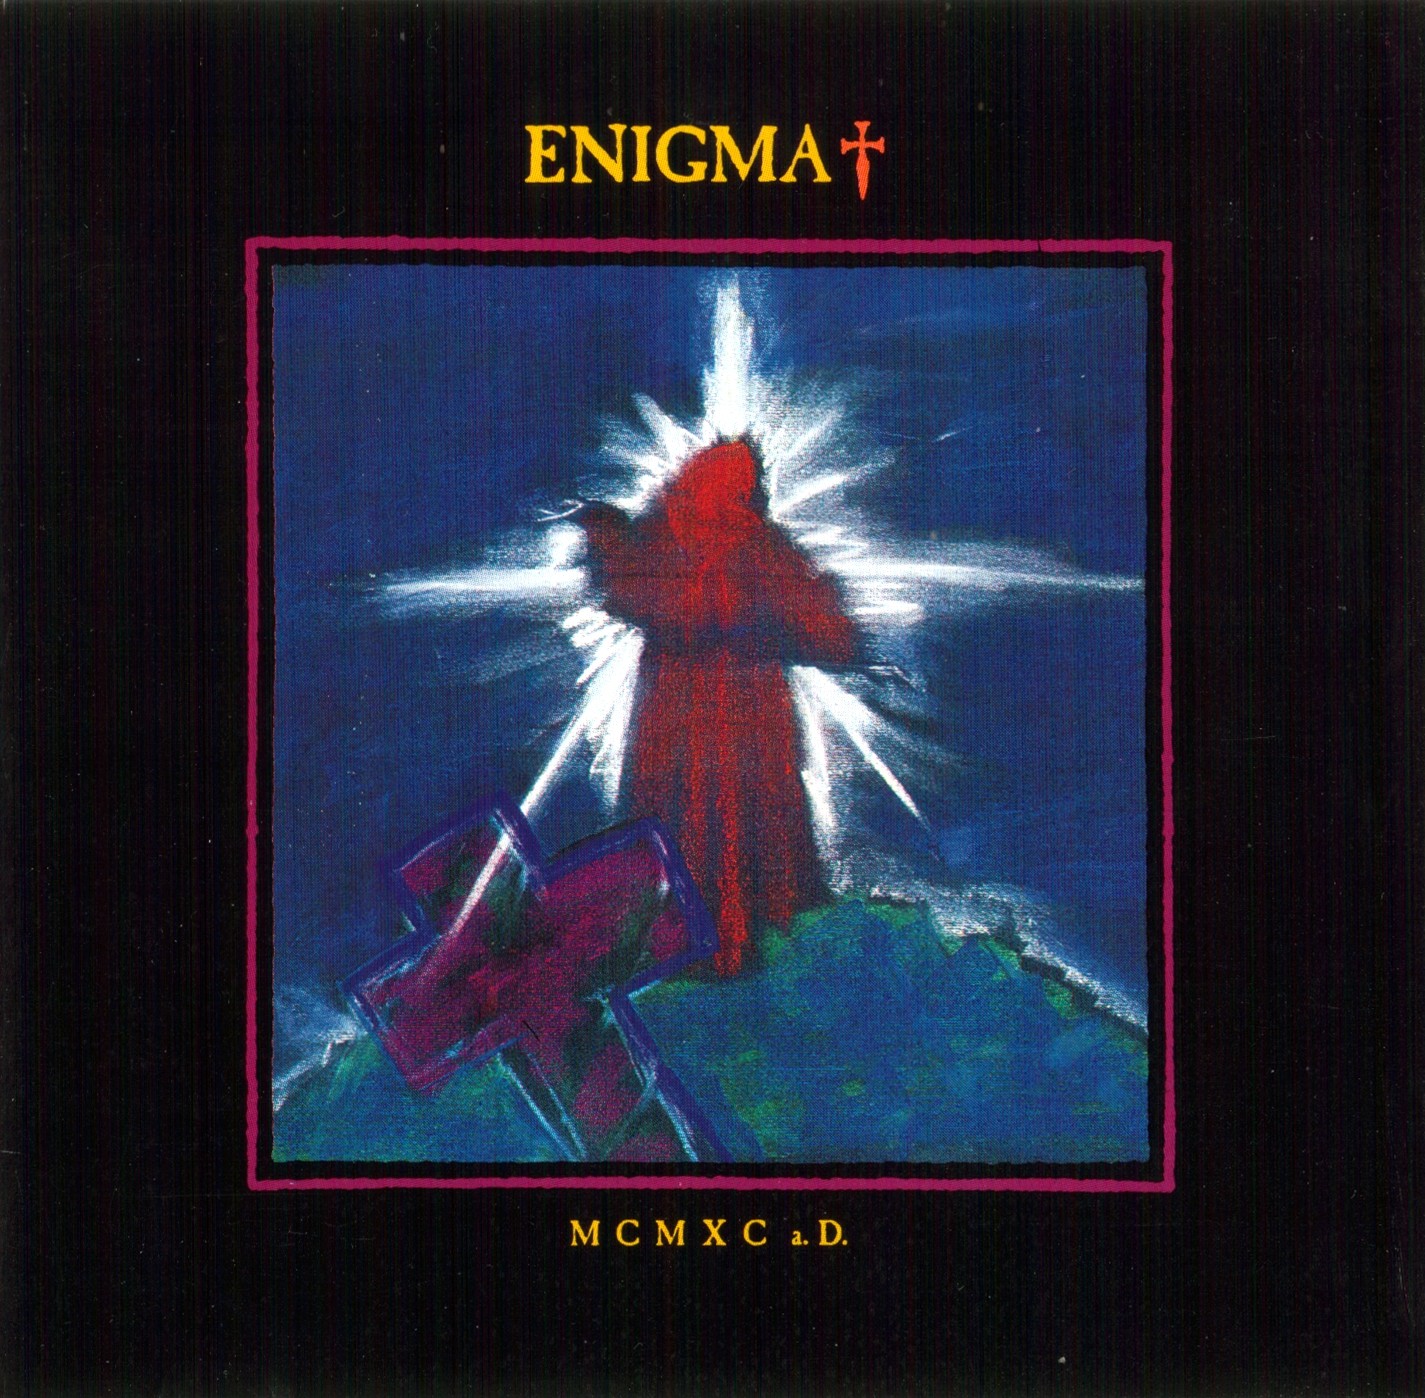 [Enigma+-+MCMXC+A.D.jpg]